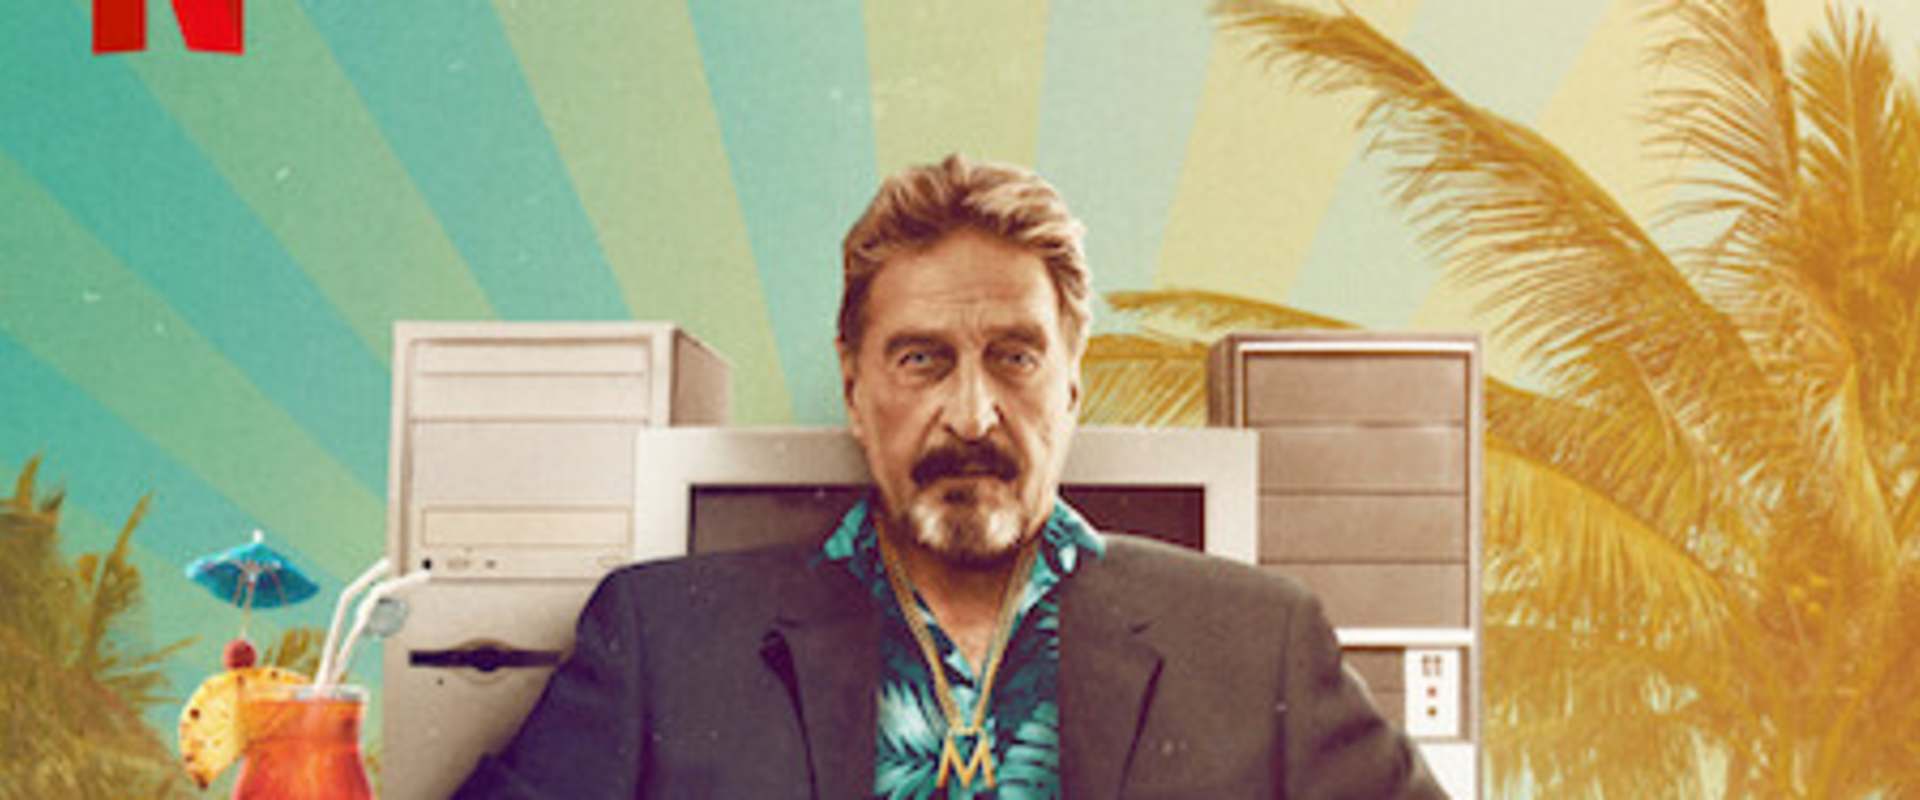 Running with the Devil: The Wild World of John McAfee background 1